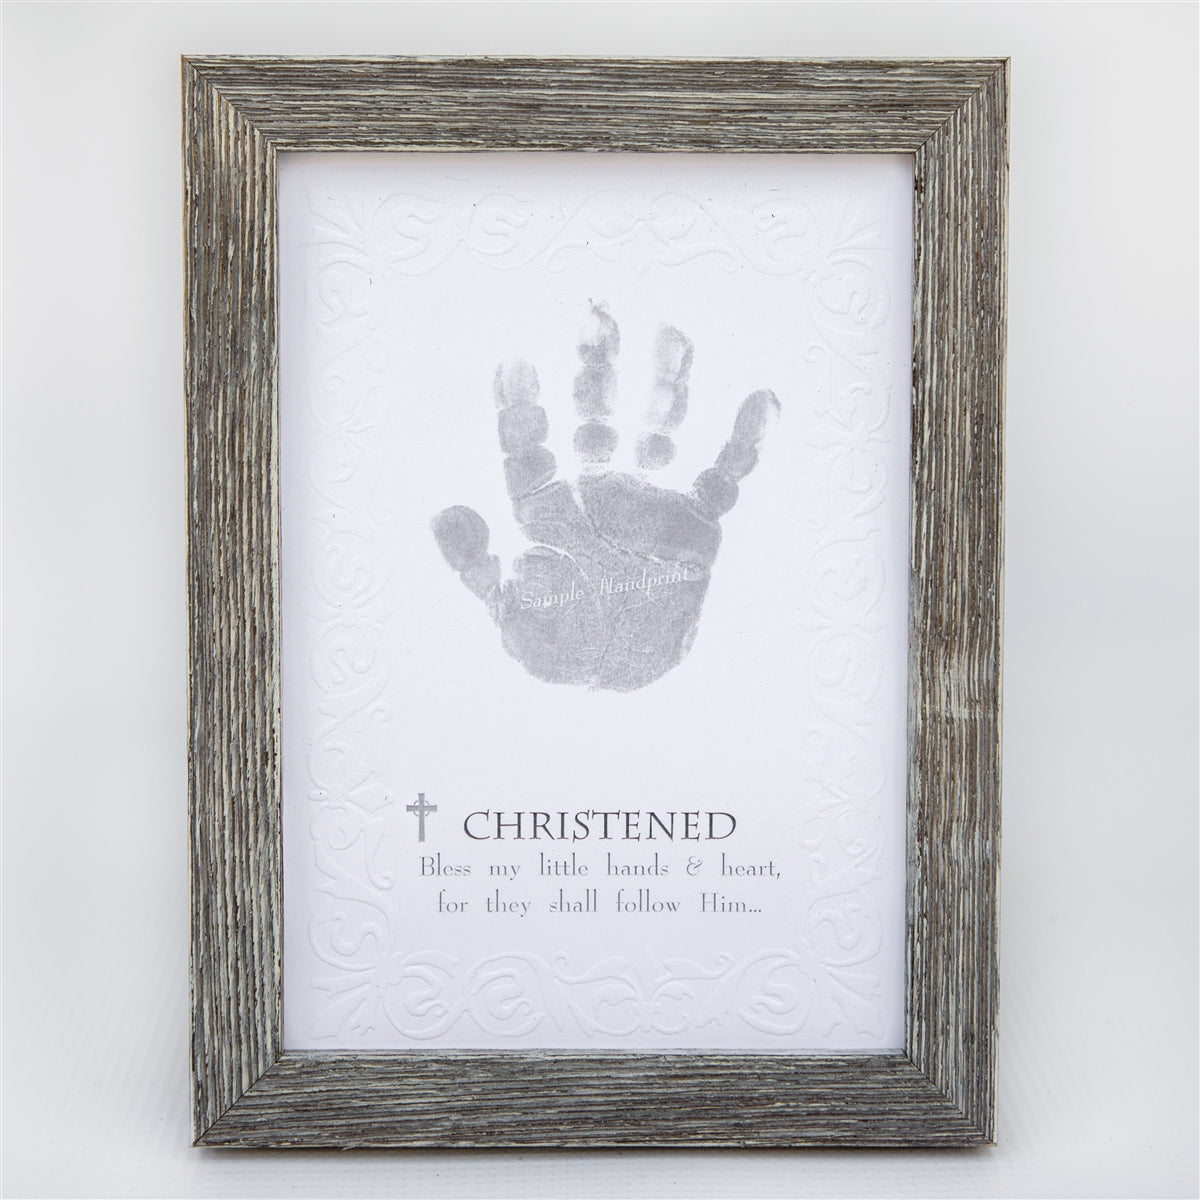 5x7 farmhouse frame with "Christened" Sentiment on embossed cardstock with space for a child's handprint.